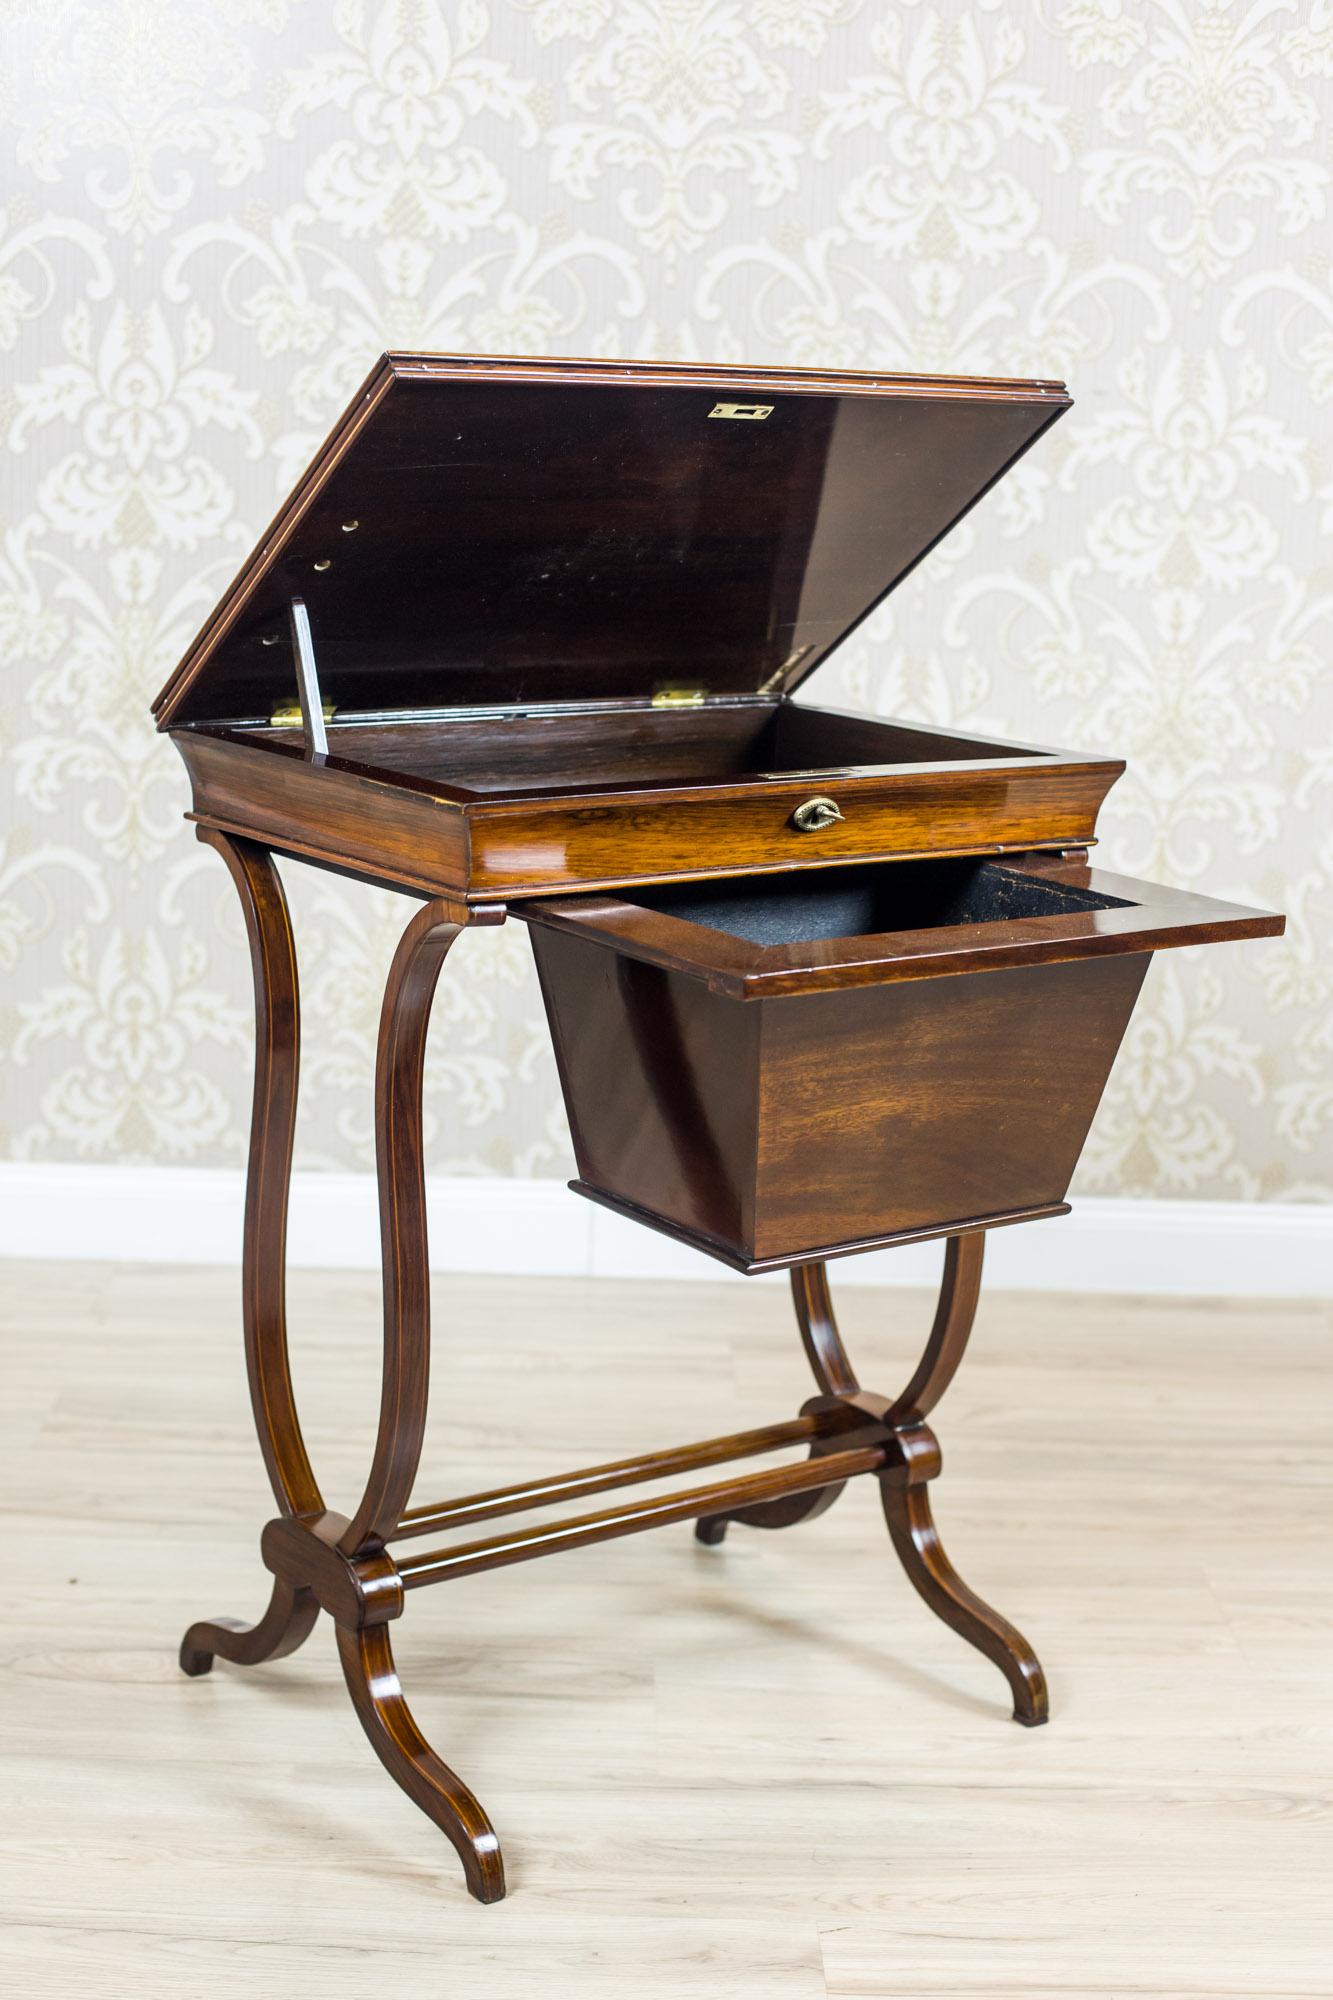 We present you this antique sewing table, circa 1820, made of rosewood.
The table is equipped with a shallow compartment under the liftable top and a basket for needlework in the form of a drawer suspended underneath.
The legs are in the shape of